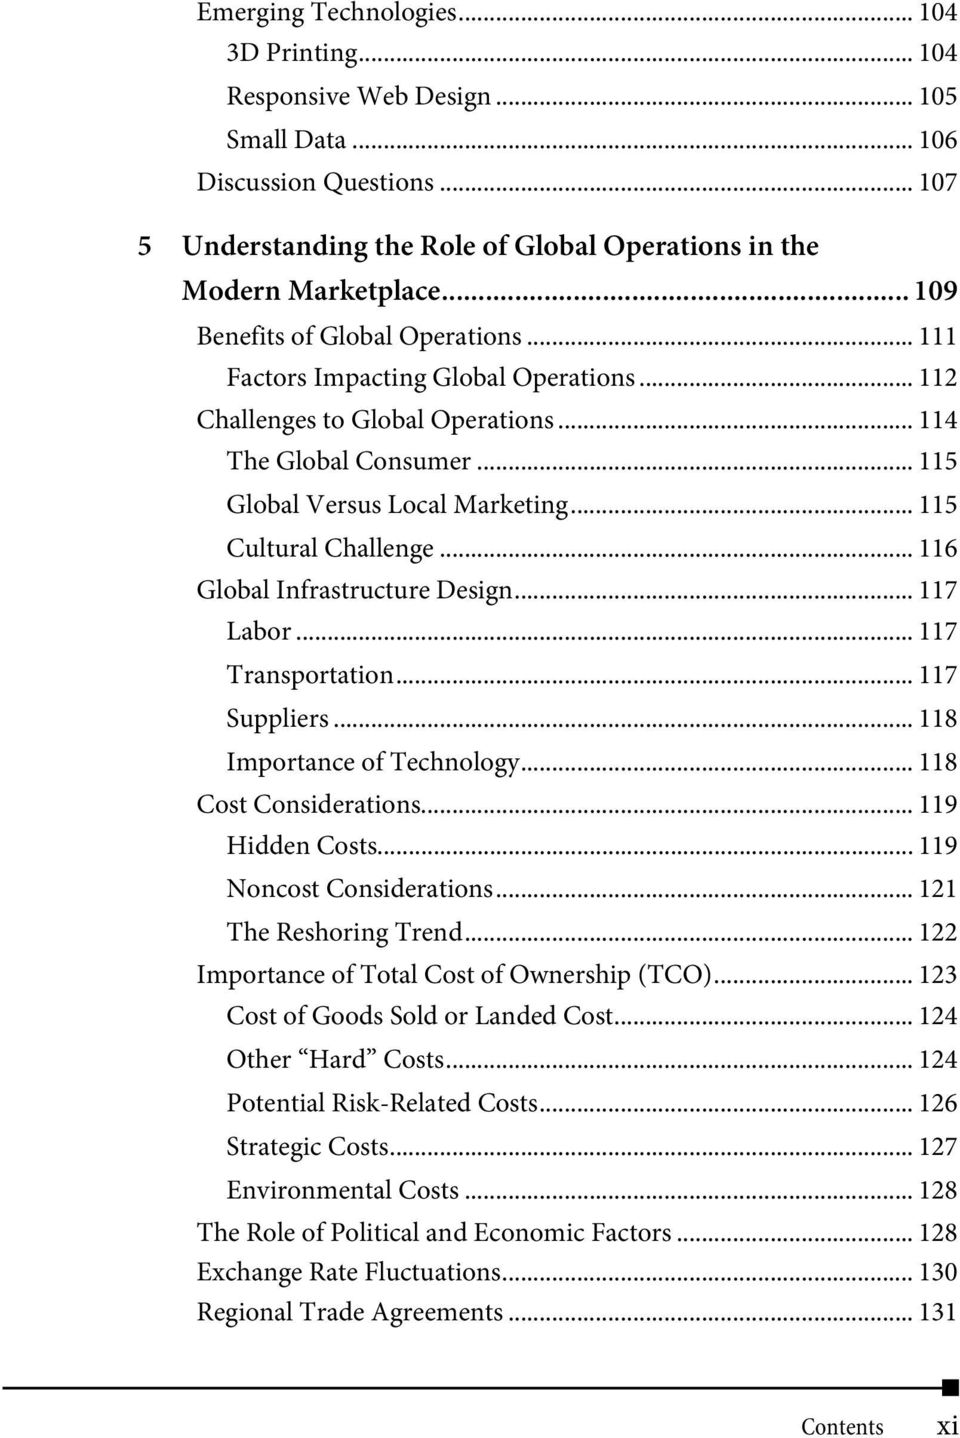 .. 115 Cultural Challenge... 116 Global Infrastructure Design... 117 Labor... 117 Transportation... 117 Suppliers... 118 Importance of Technology... 118 Cost Considerations... 119 Hidden Costs.